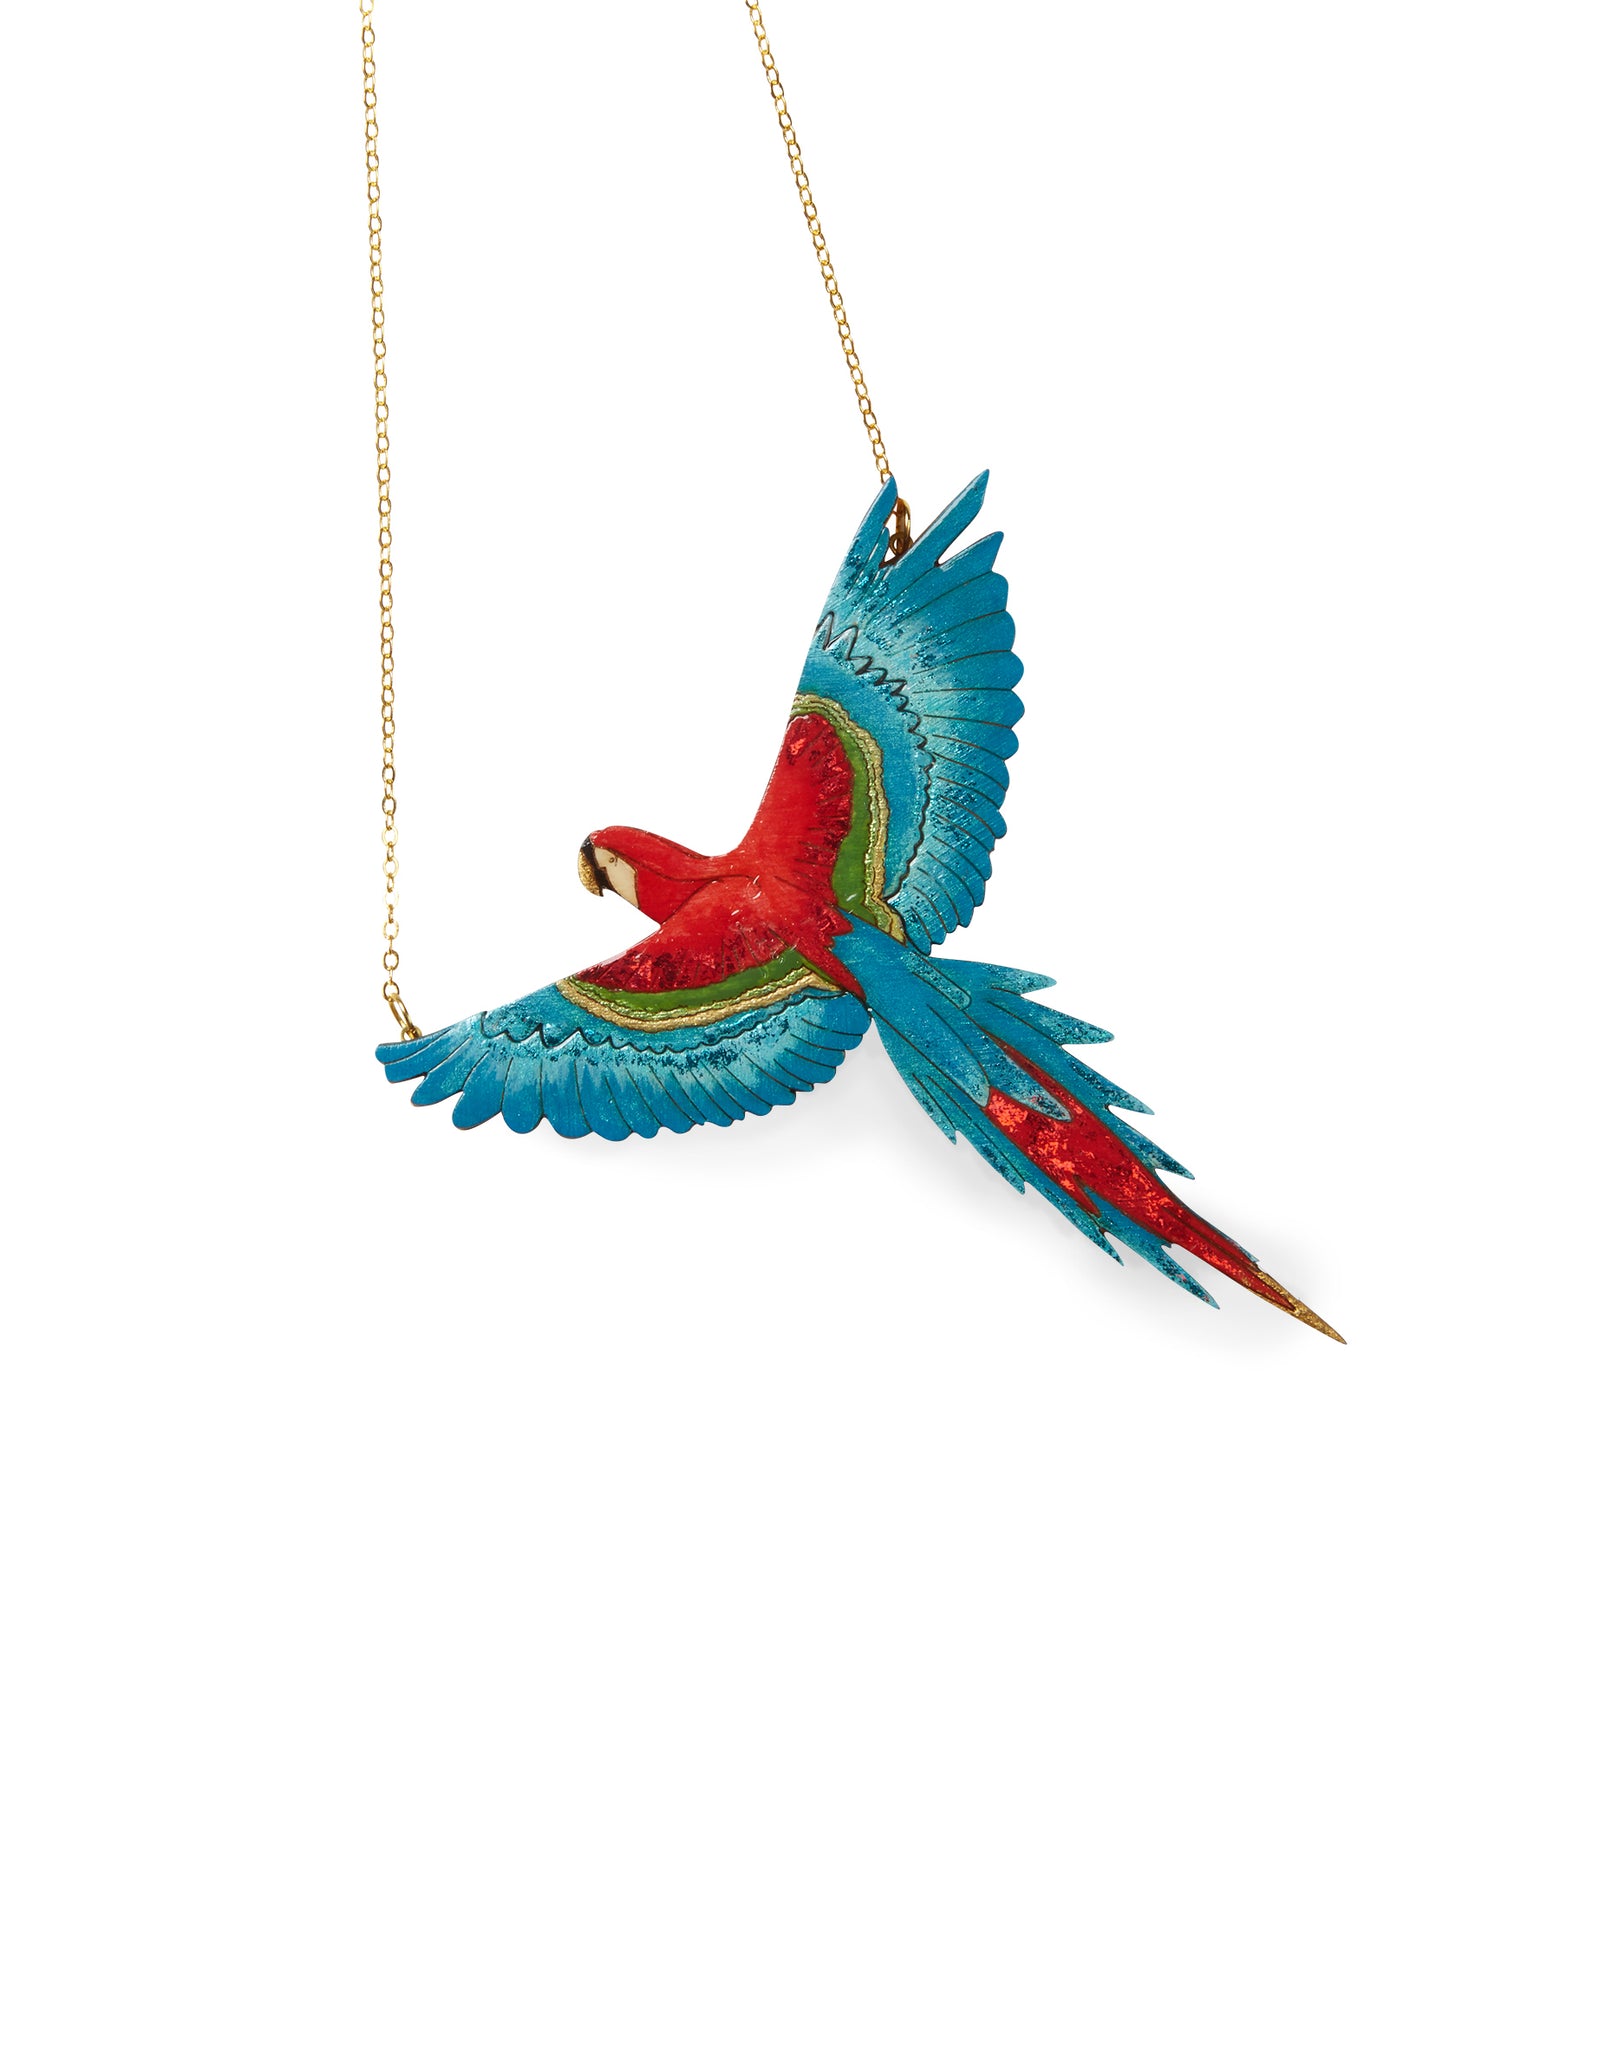 Parrot Laser-cut Acrylic Hand-painted British-made Retro Necklace